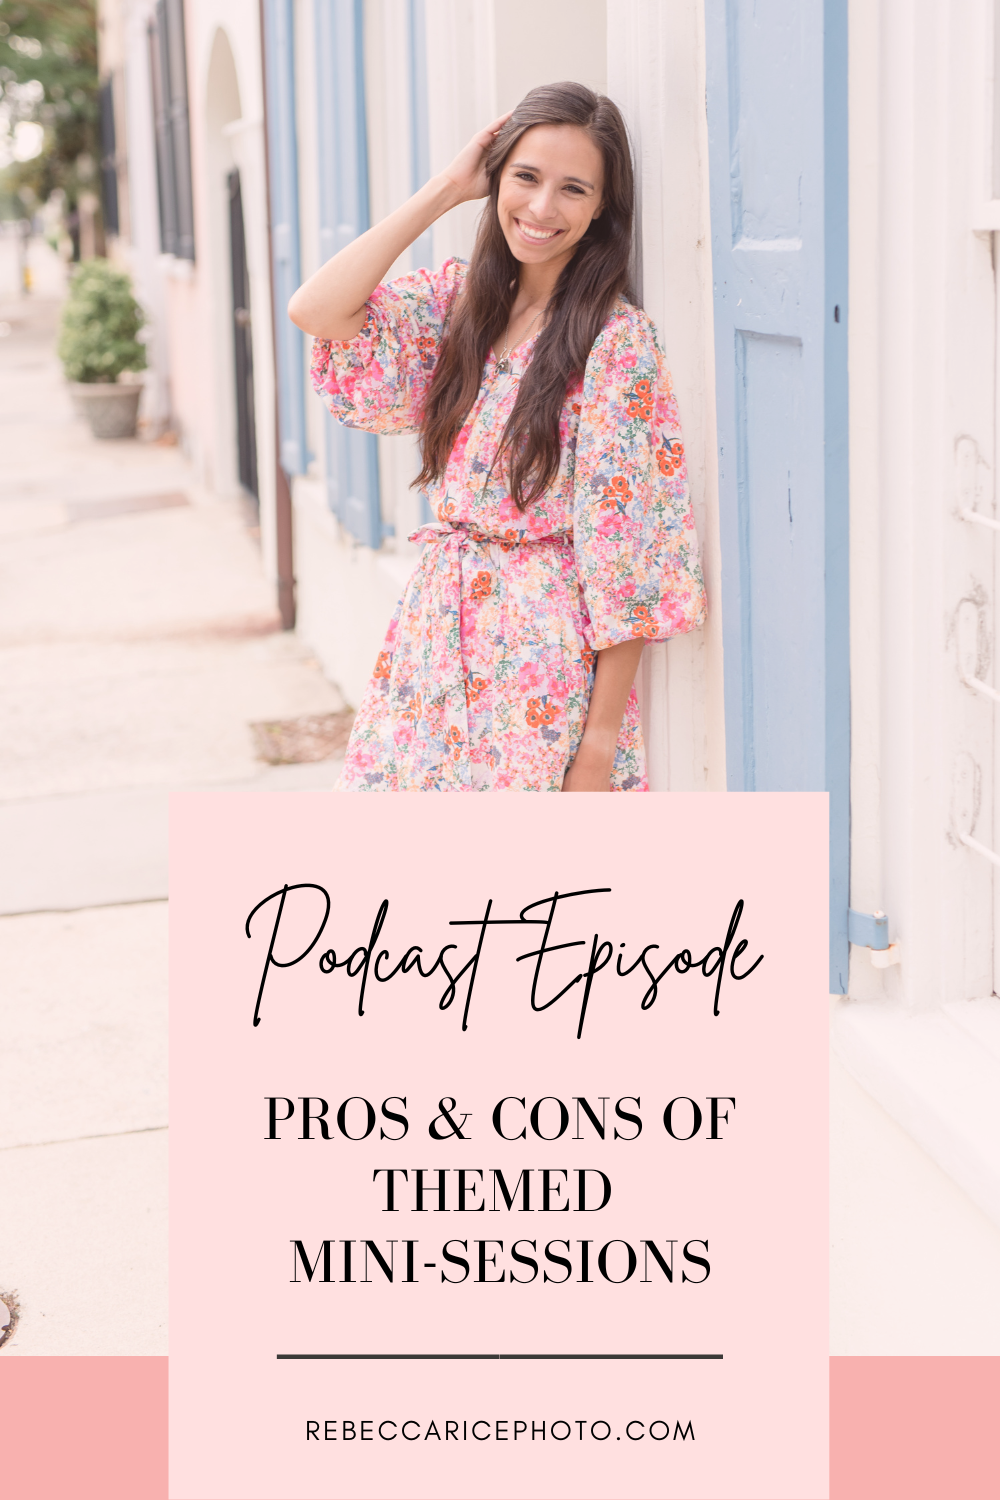 Pros and Cons of Themed Mini-Sessions